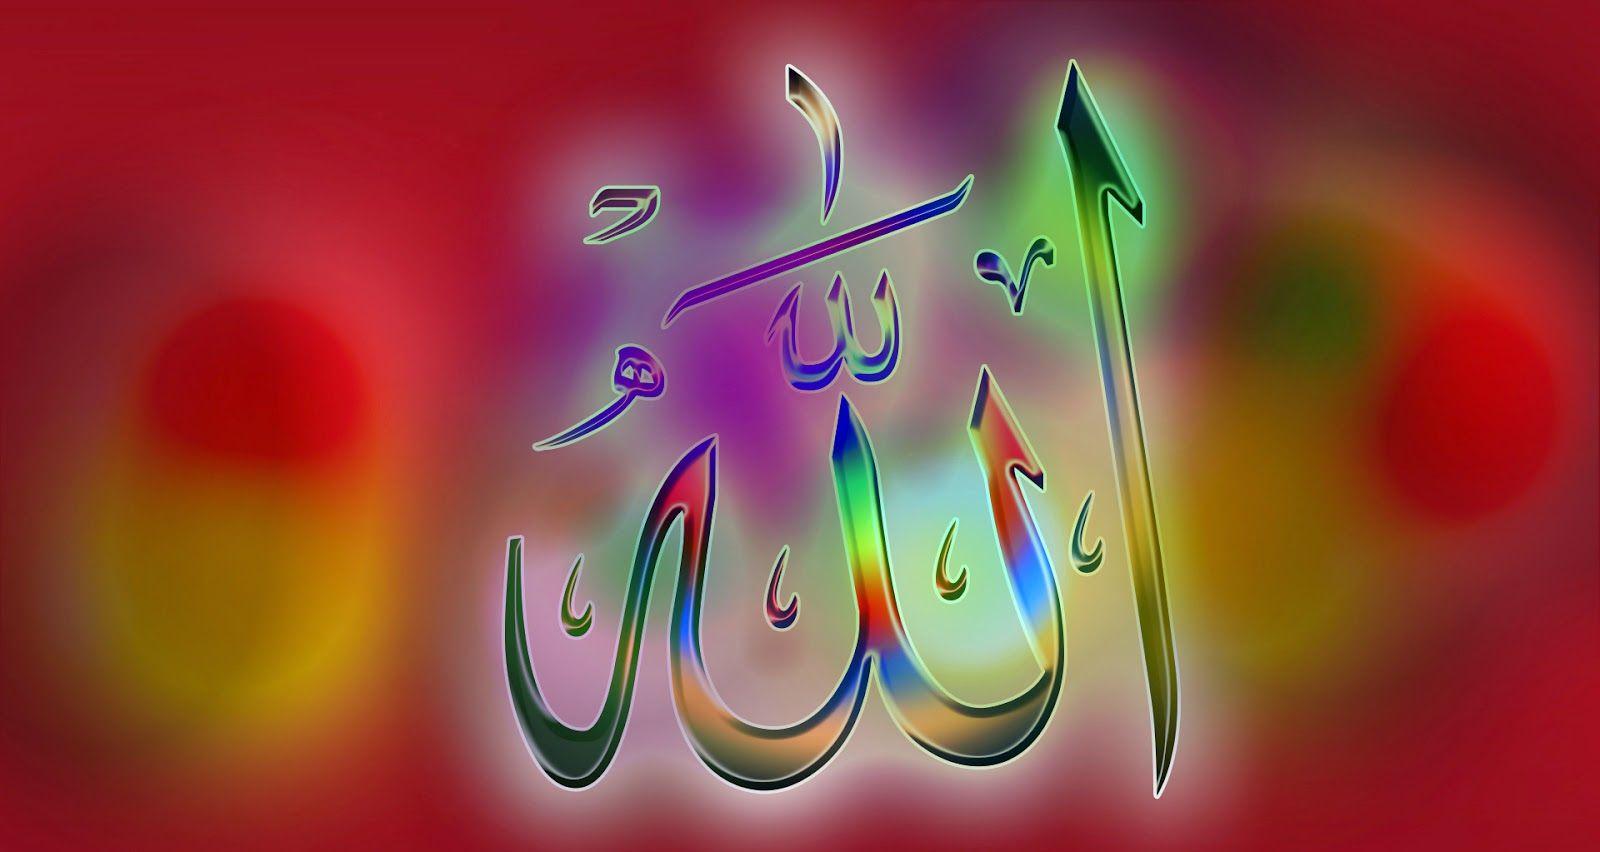 Pak Islamic World  Hadees Pak Quran Majeed And Islamic Quotes  Allah  names Wallpapers  Beautiful animated wallpapers  islamic picture zone